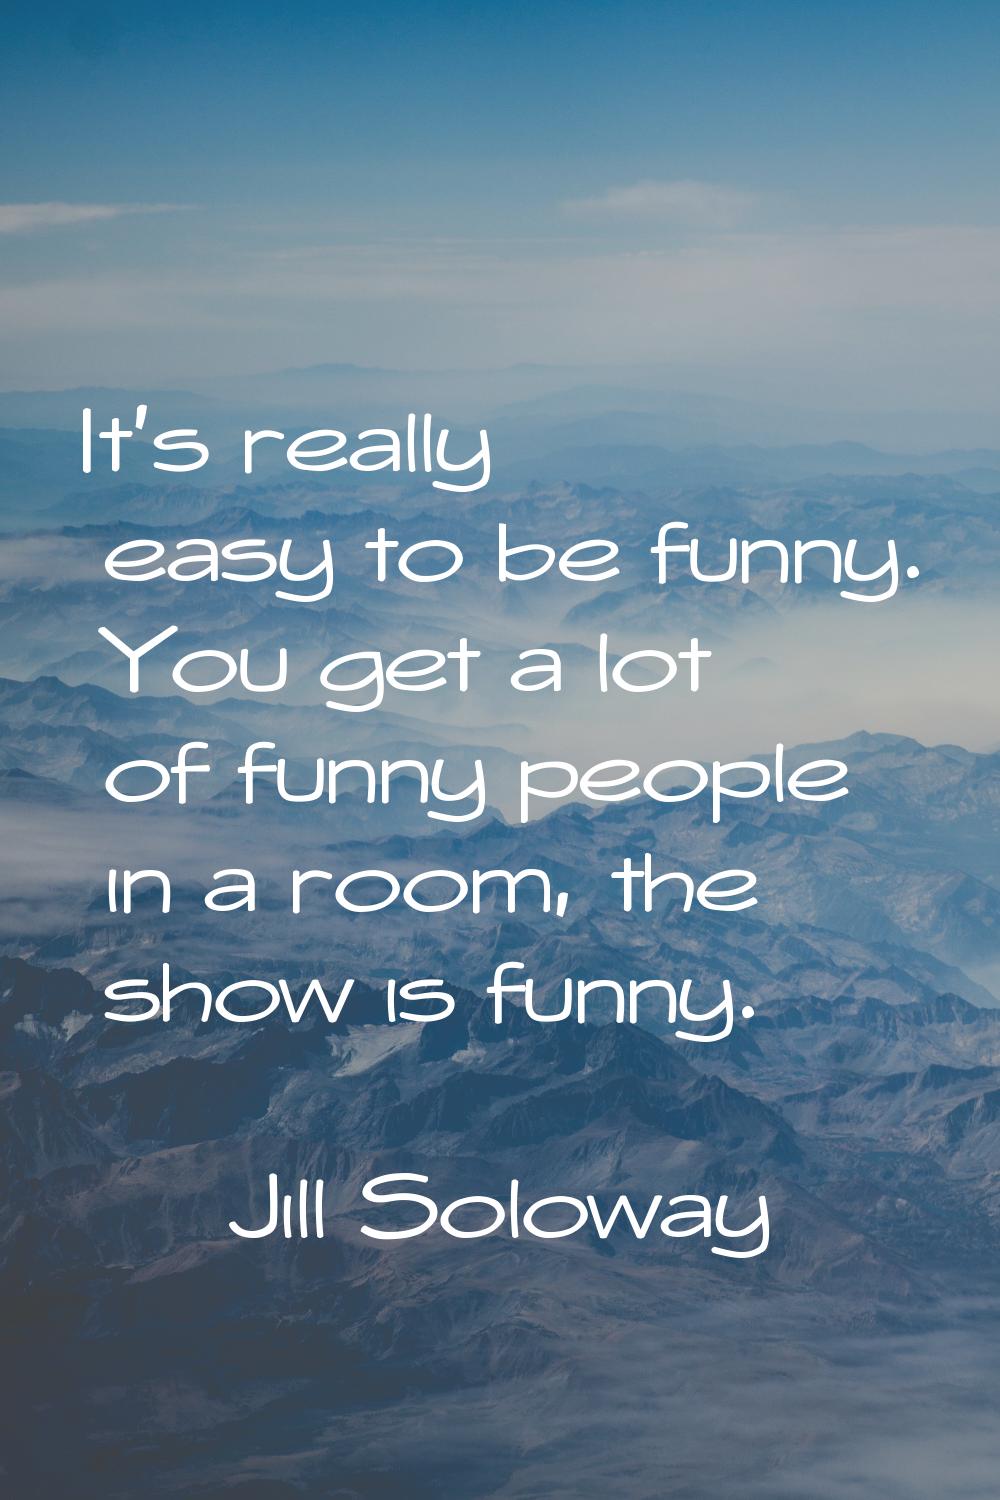 It's really easy to be funny. You get a lot of funny people in a room, the show is funny.